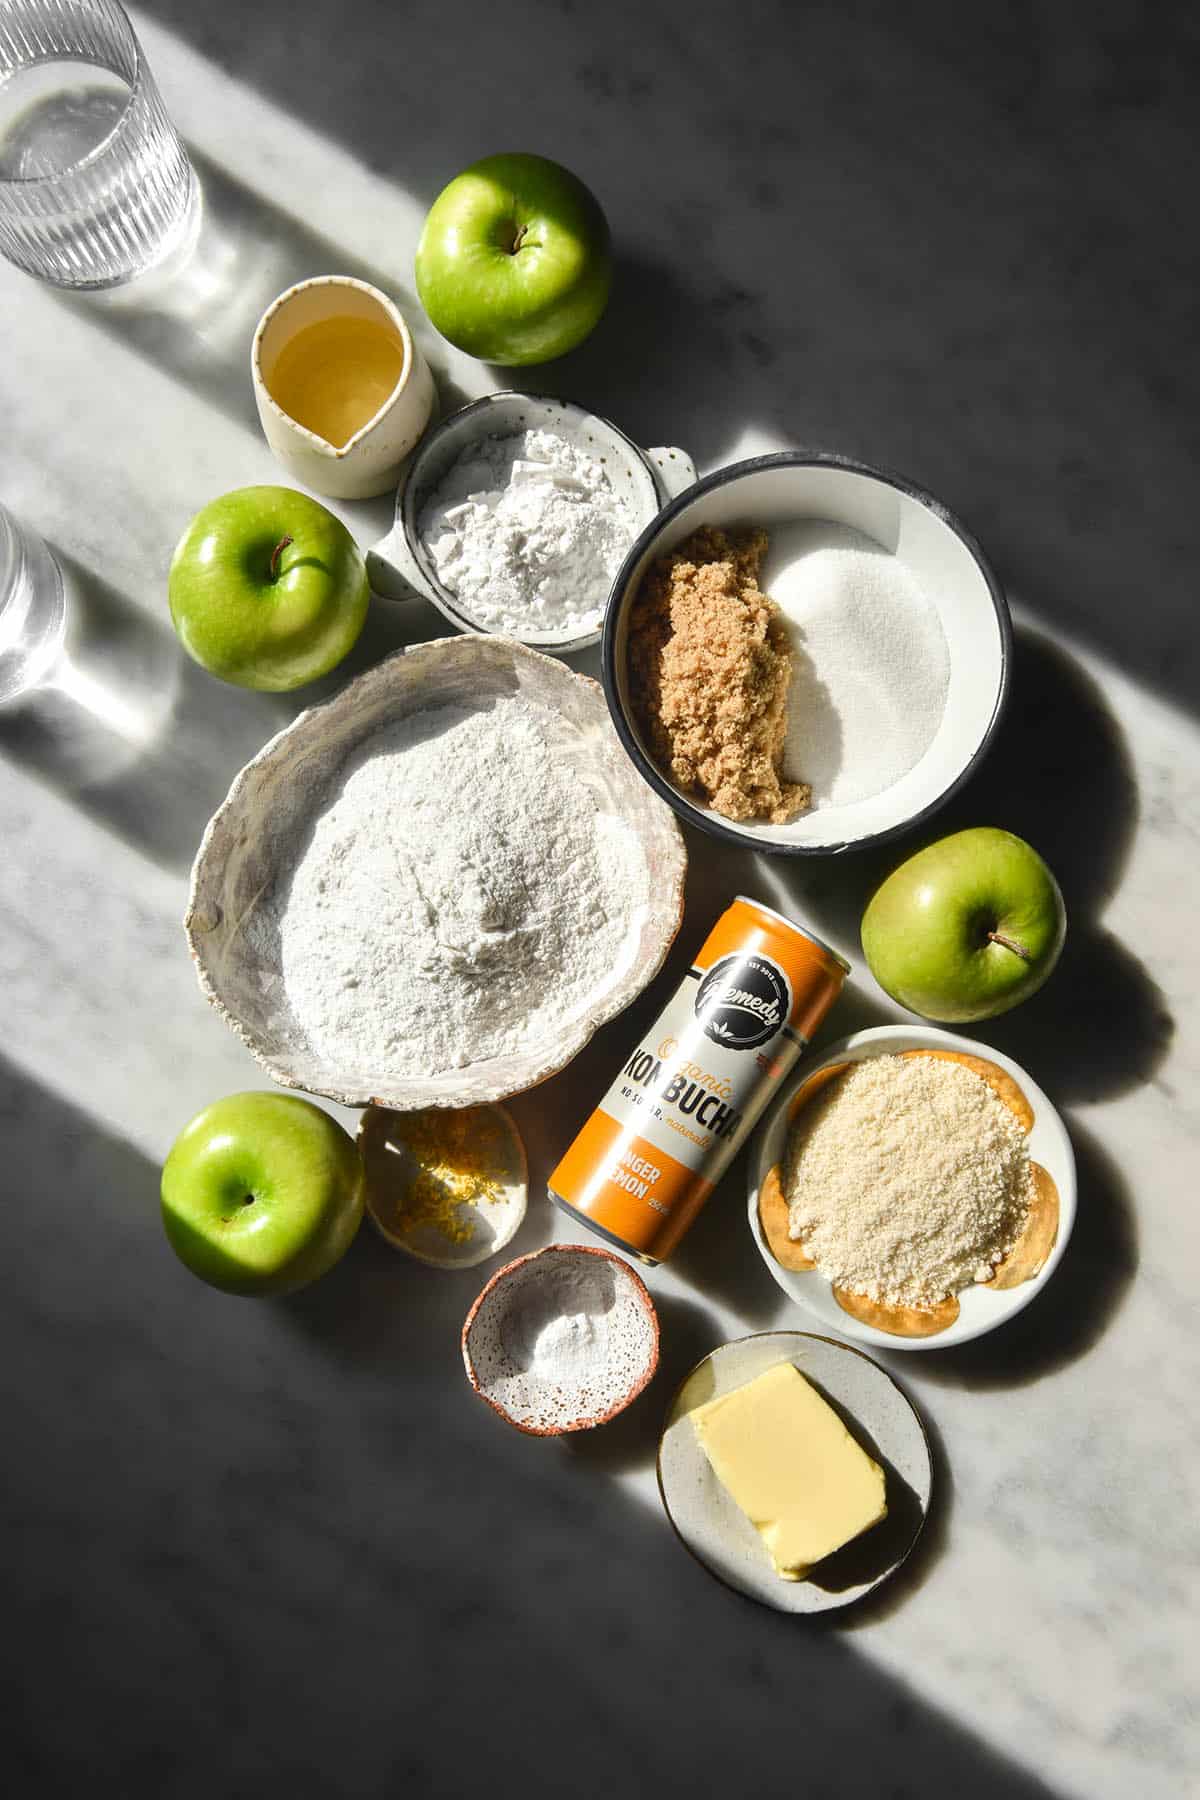 A sunlit view of the ingredients used for a gluten free apple cake in small white ceramic bowls atop a white marble table. The ingredients are surrounded by apples and sunlit water glasses sit to the left of the image